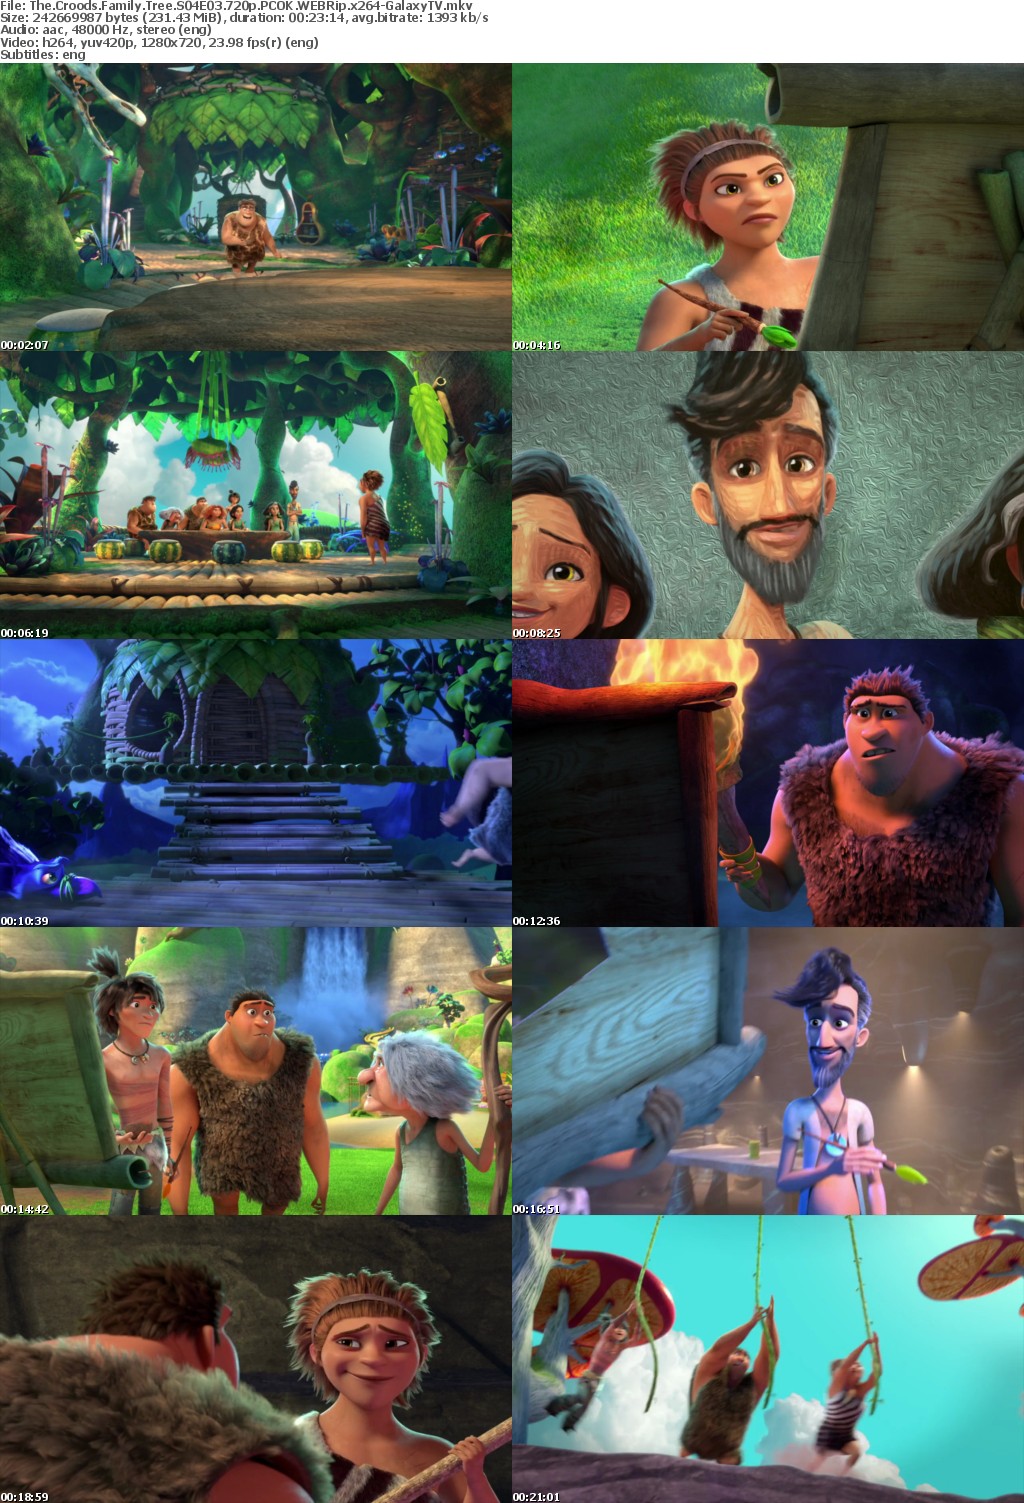 The Croods Family Tree S04 COMPLETE 720p PCOK WEBRip x264-GalaxyTV